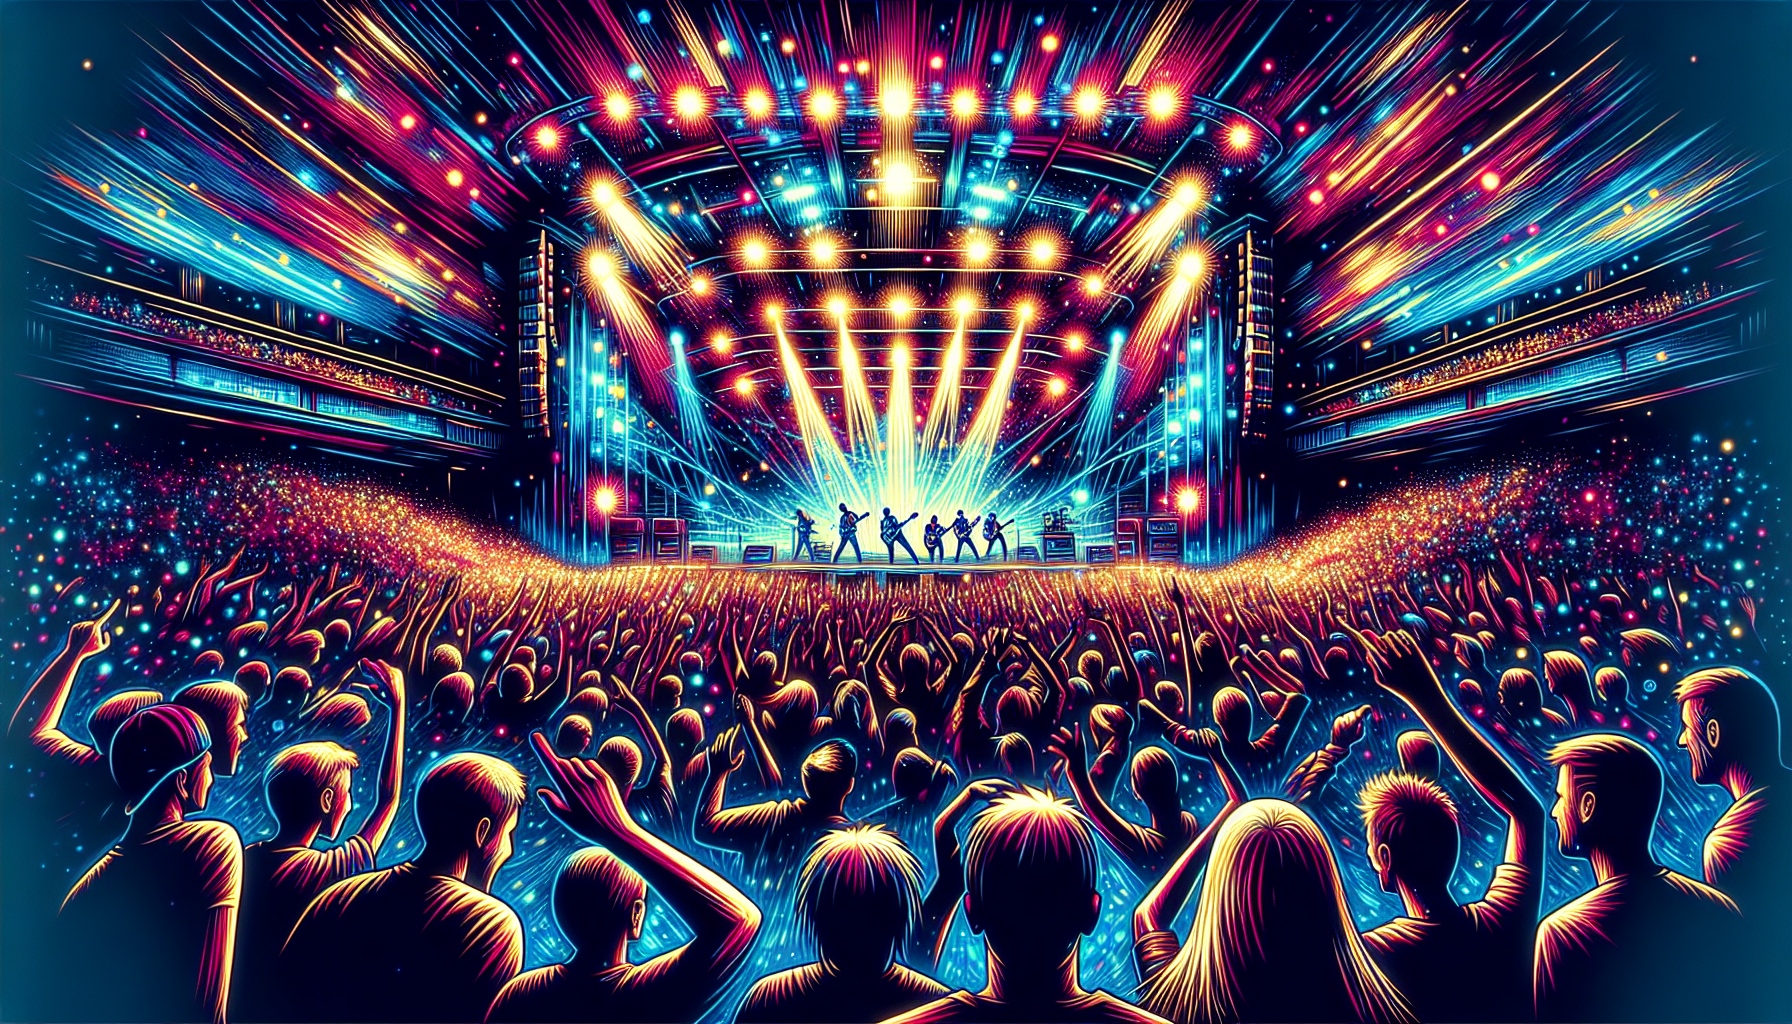 A colorful illustration of a crowded concert venue